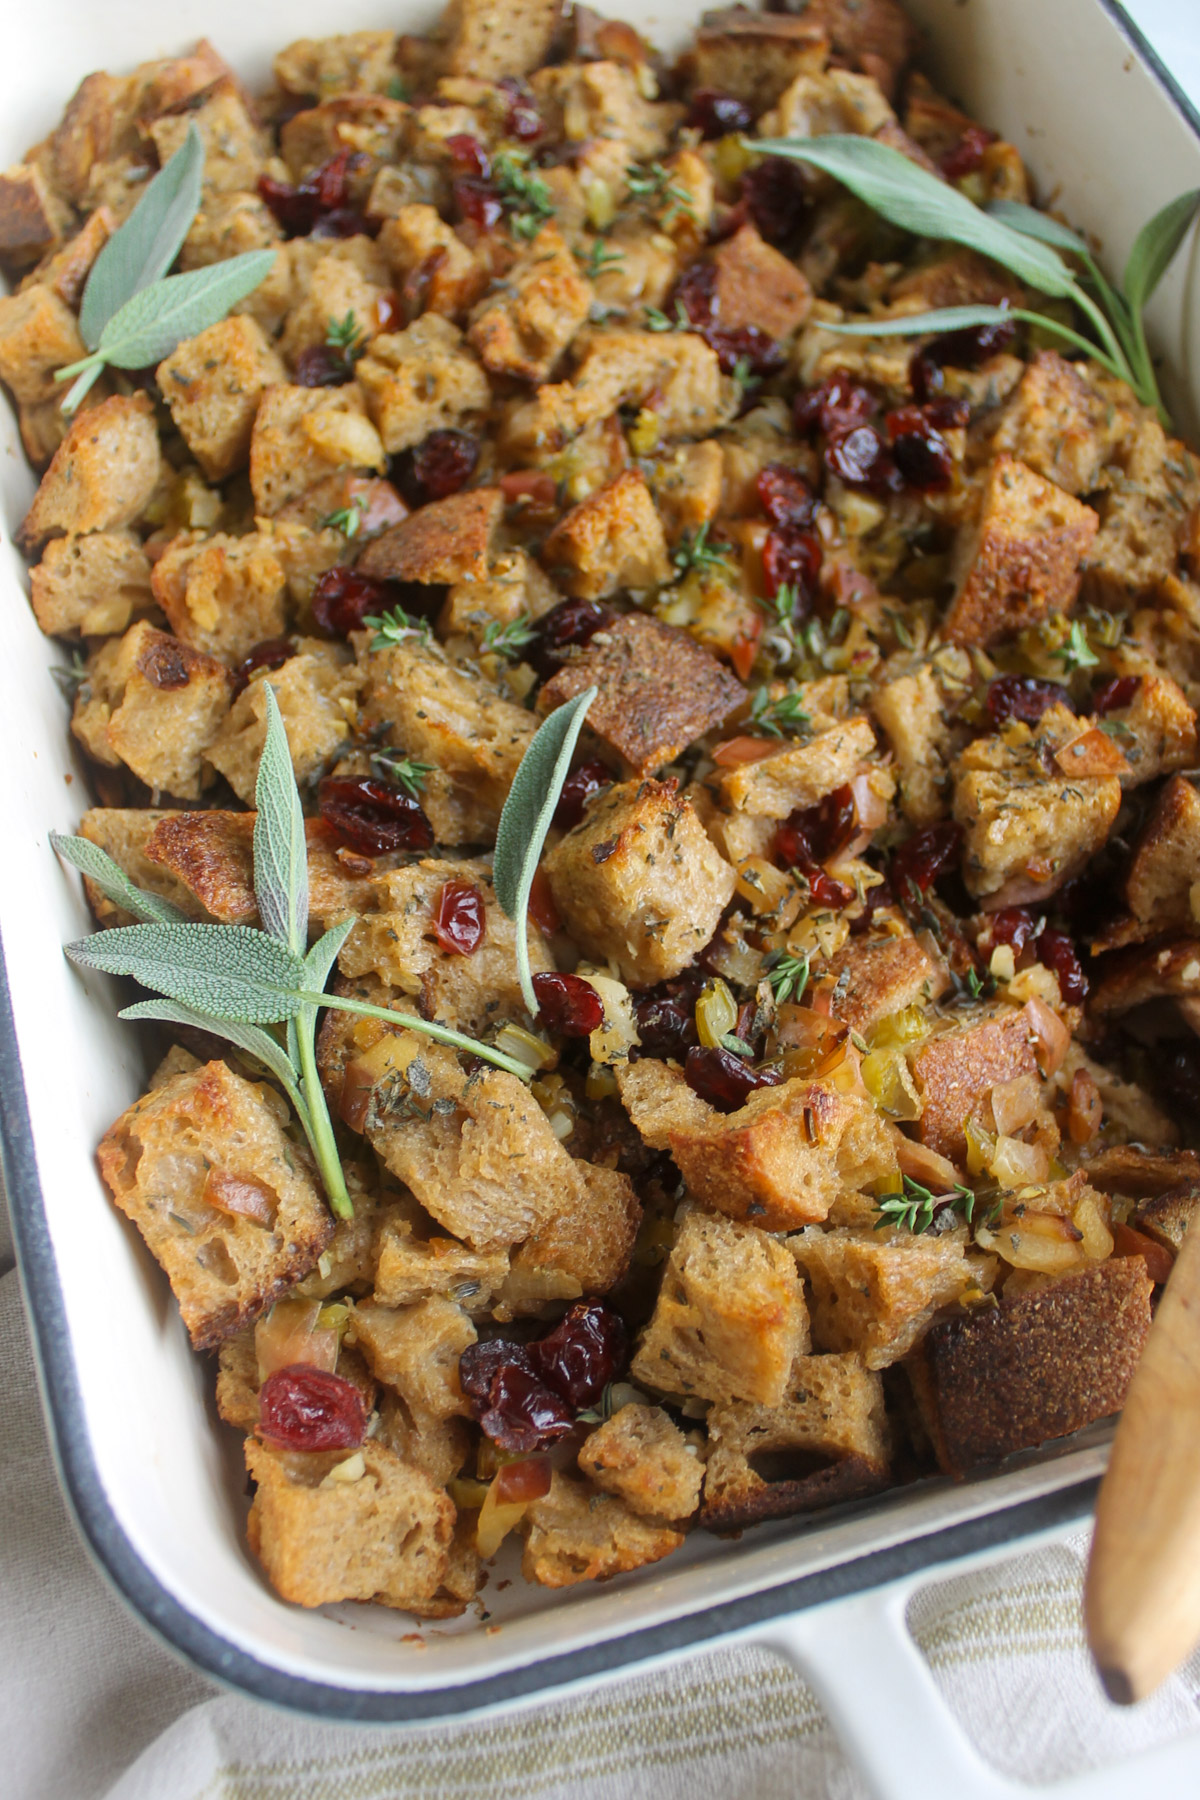 Bread stuffing in a white baking dish with red dried cranberries.